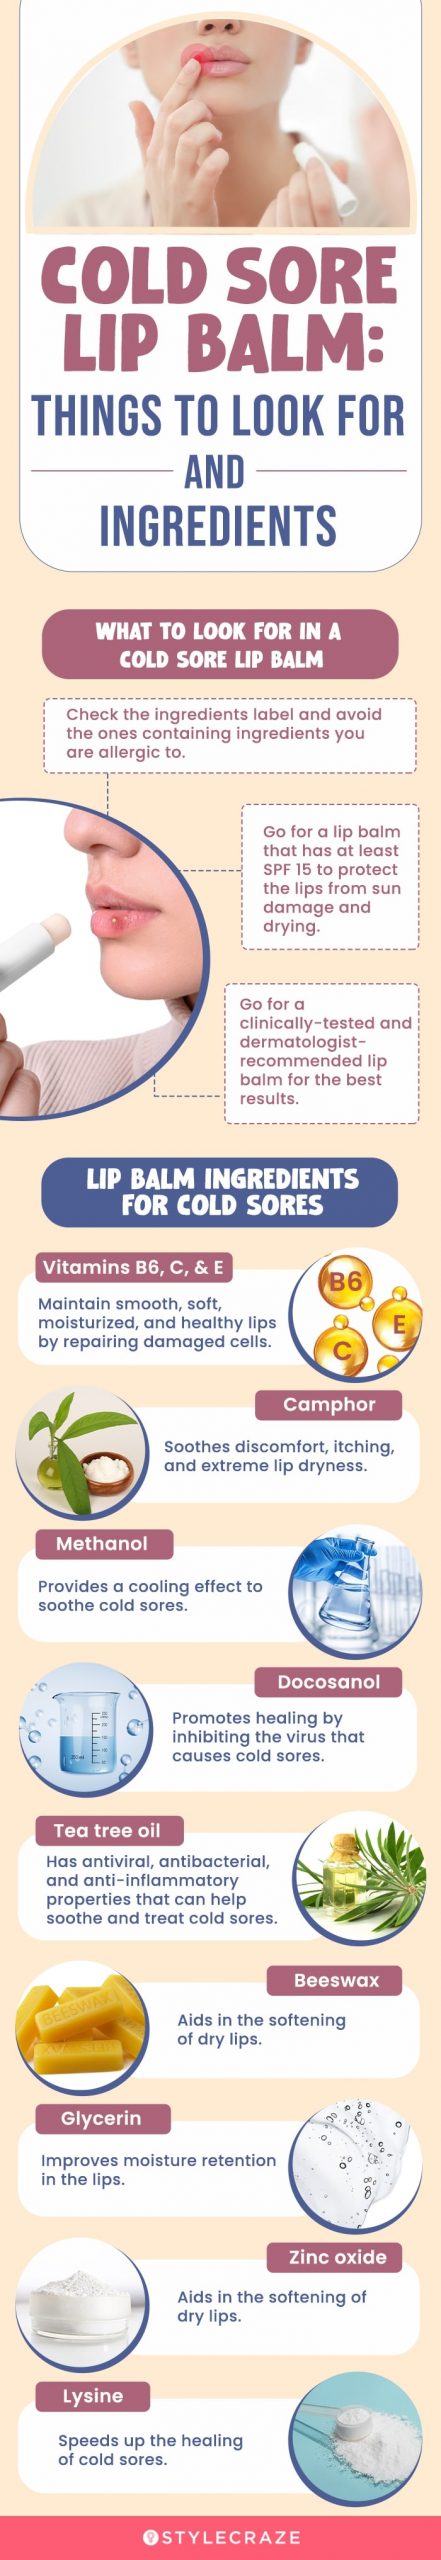 Cold Sore Lip Balm: Things to look for and Ingredients (infographic)